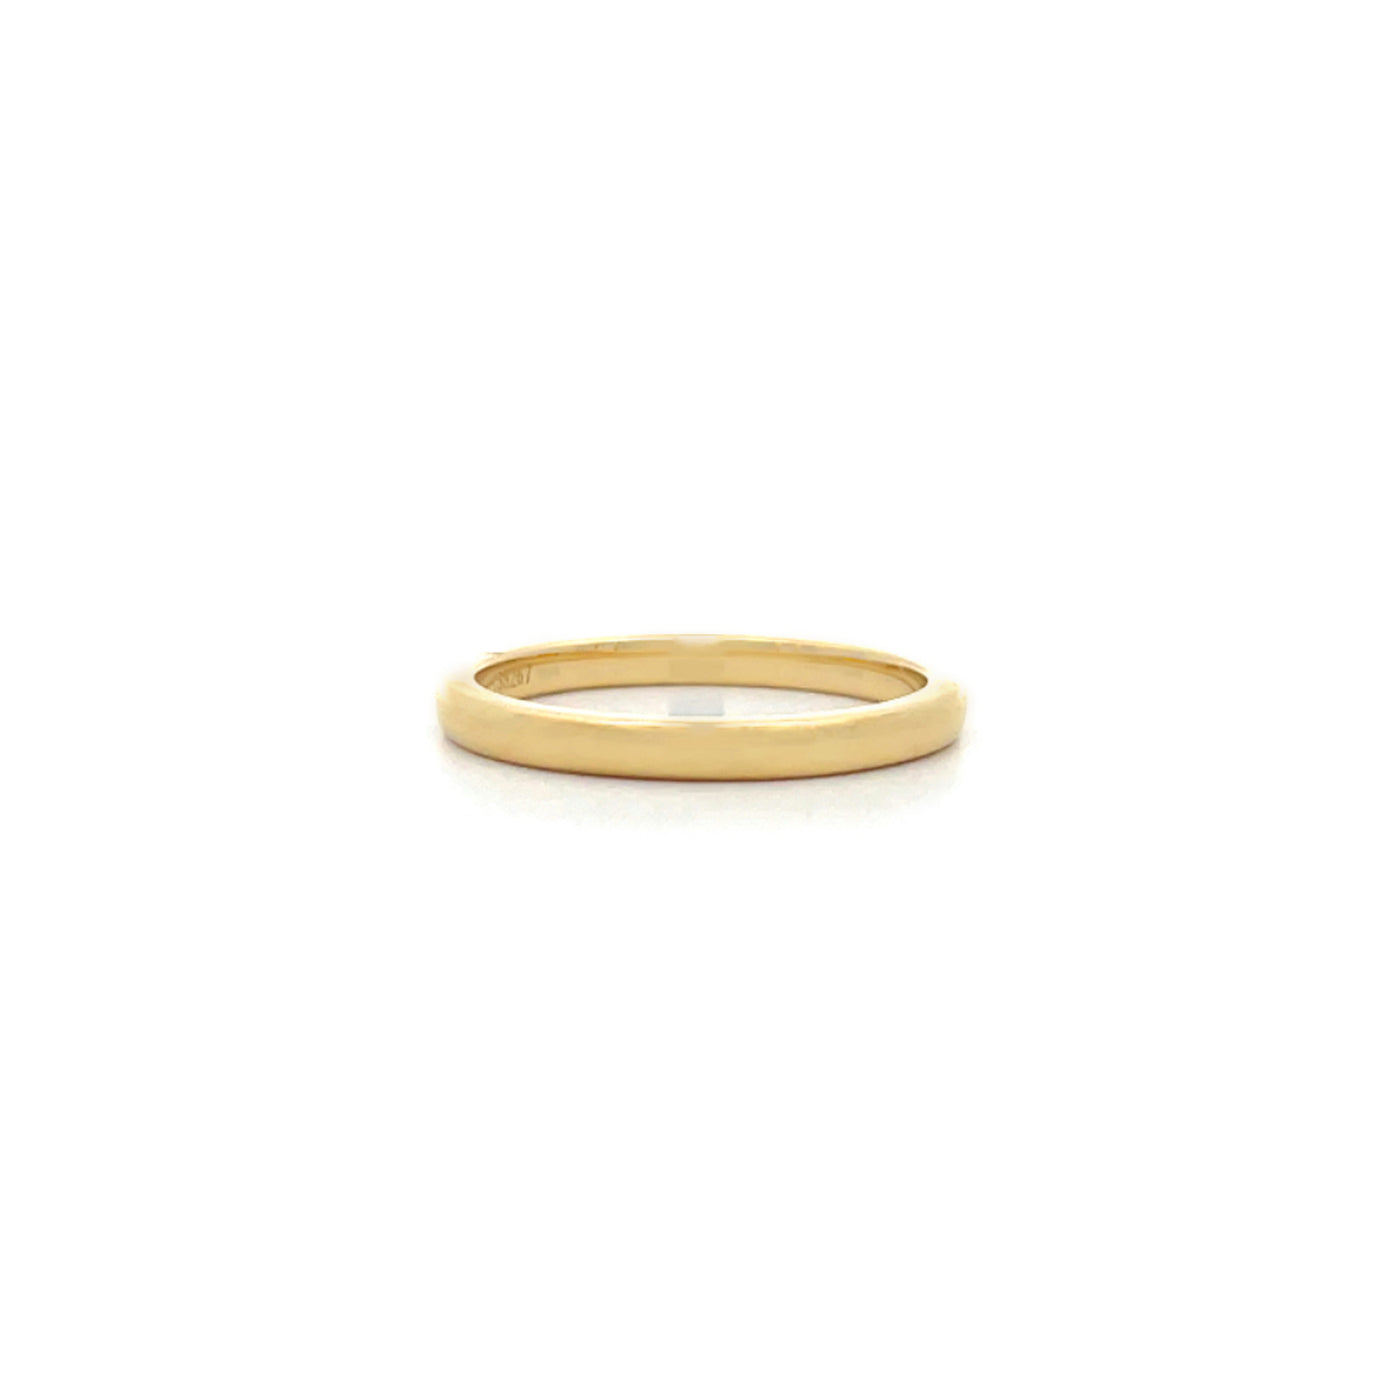 Half Round 2.7mm  Ring in Yellow Gold